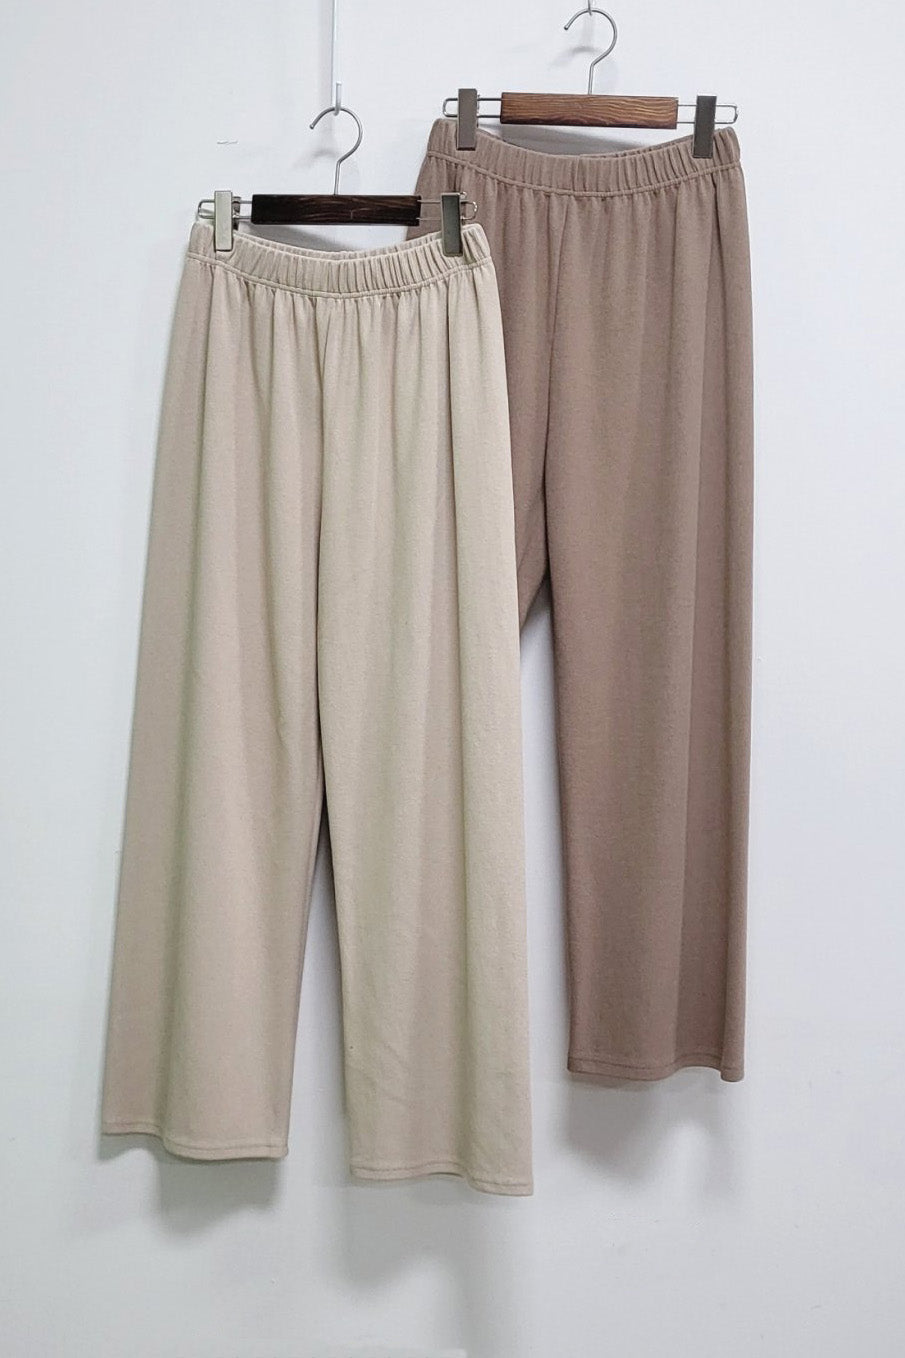 Comfy jersey pants for women